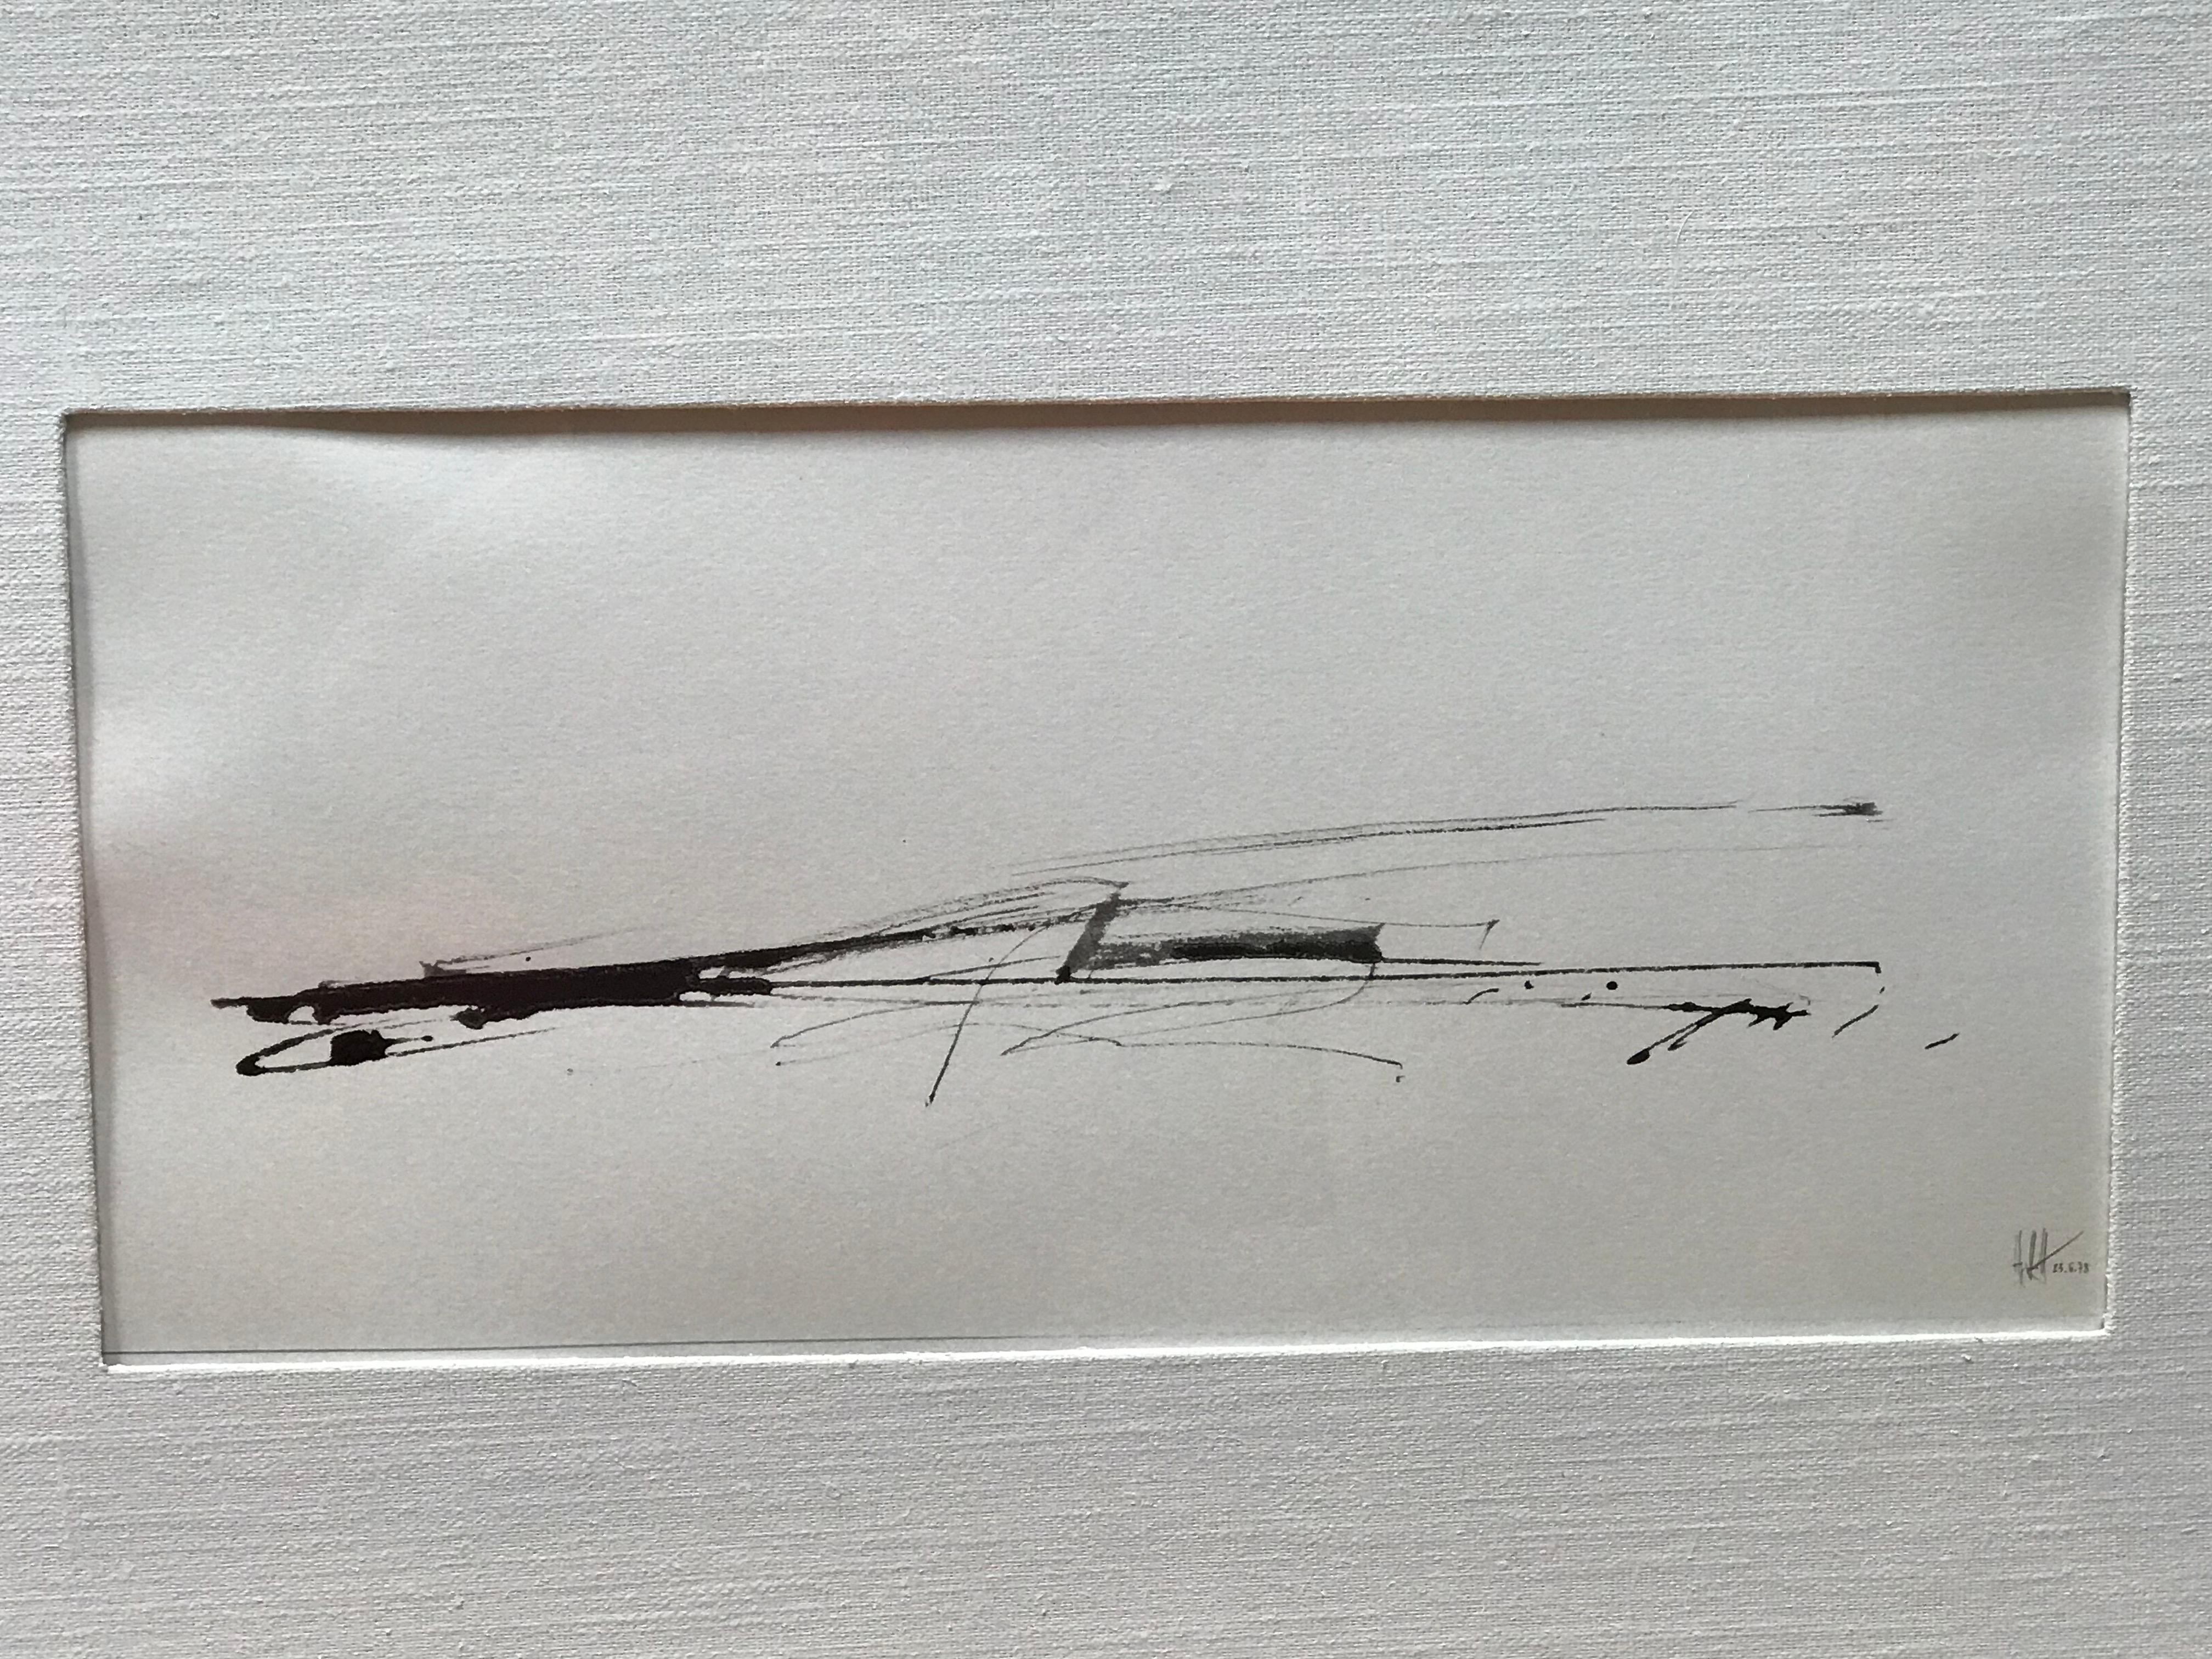 Abstract and Minimalist Pair of Drawings, Signed and Dated 2